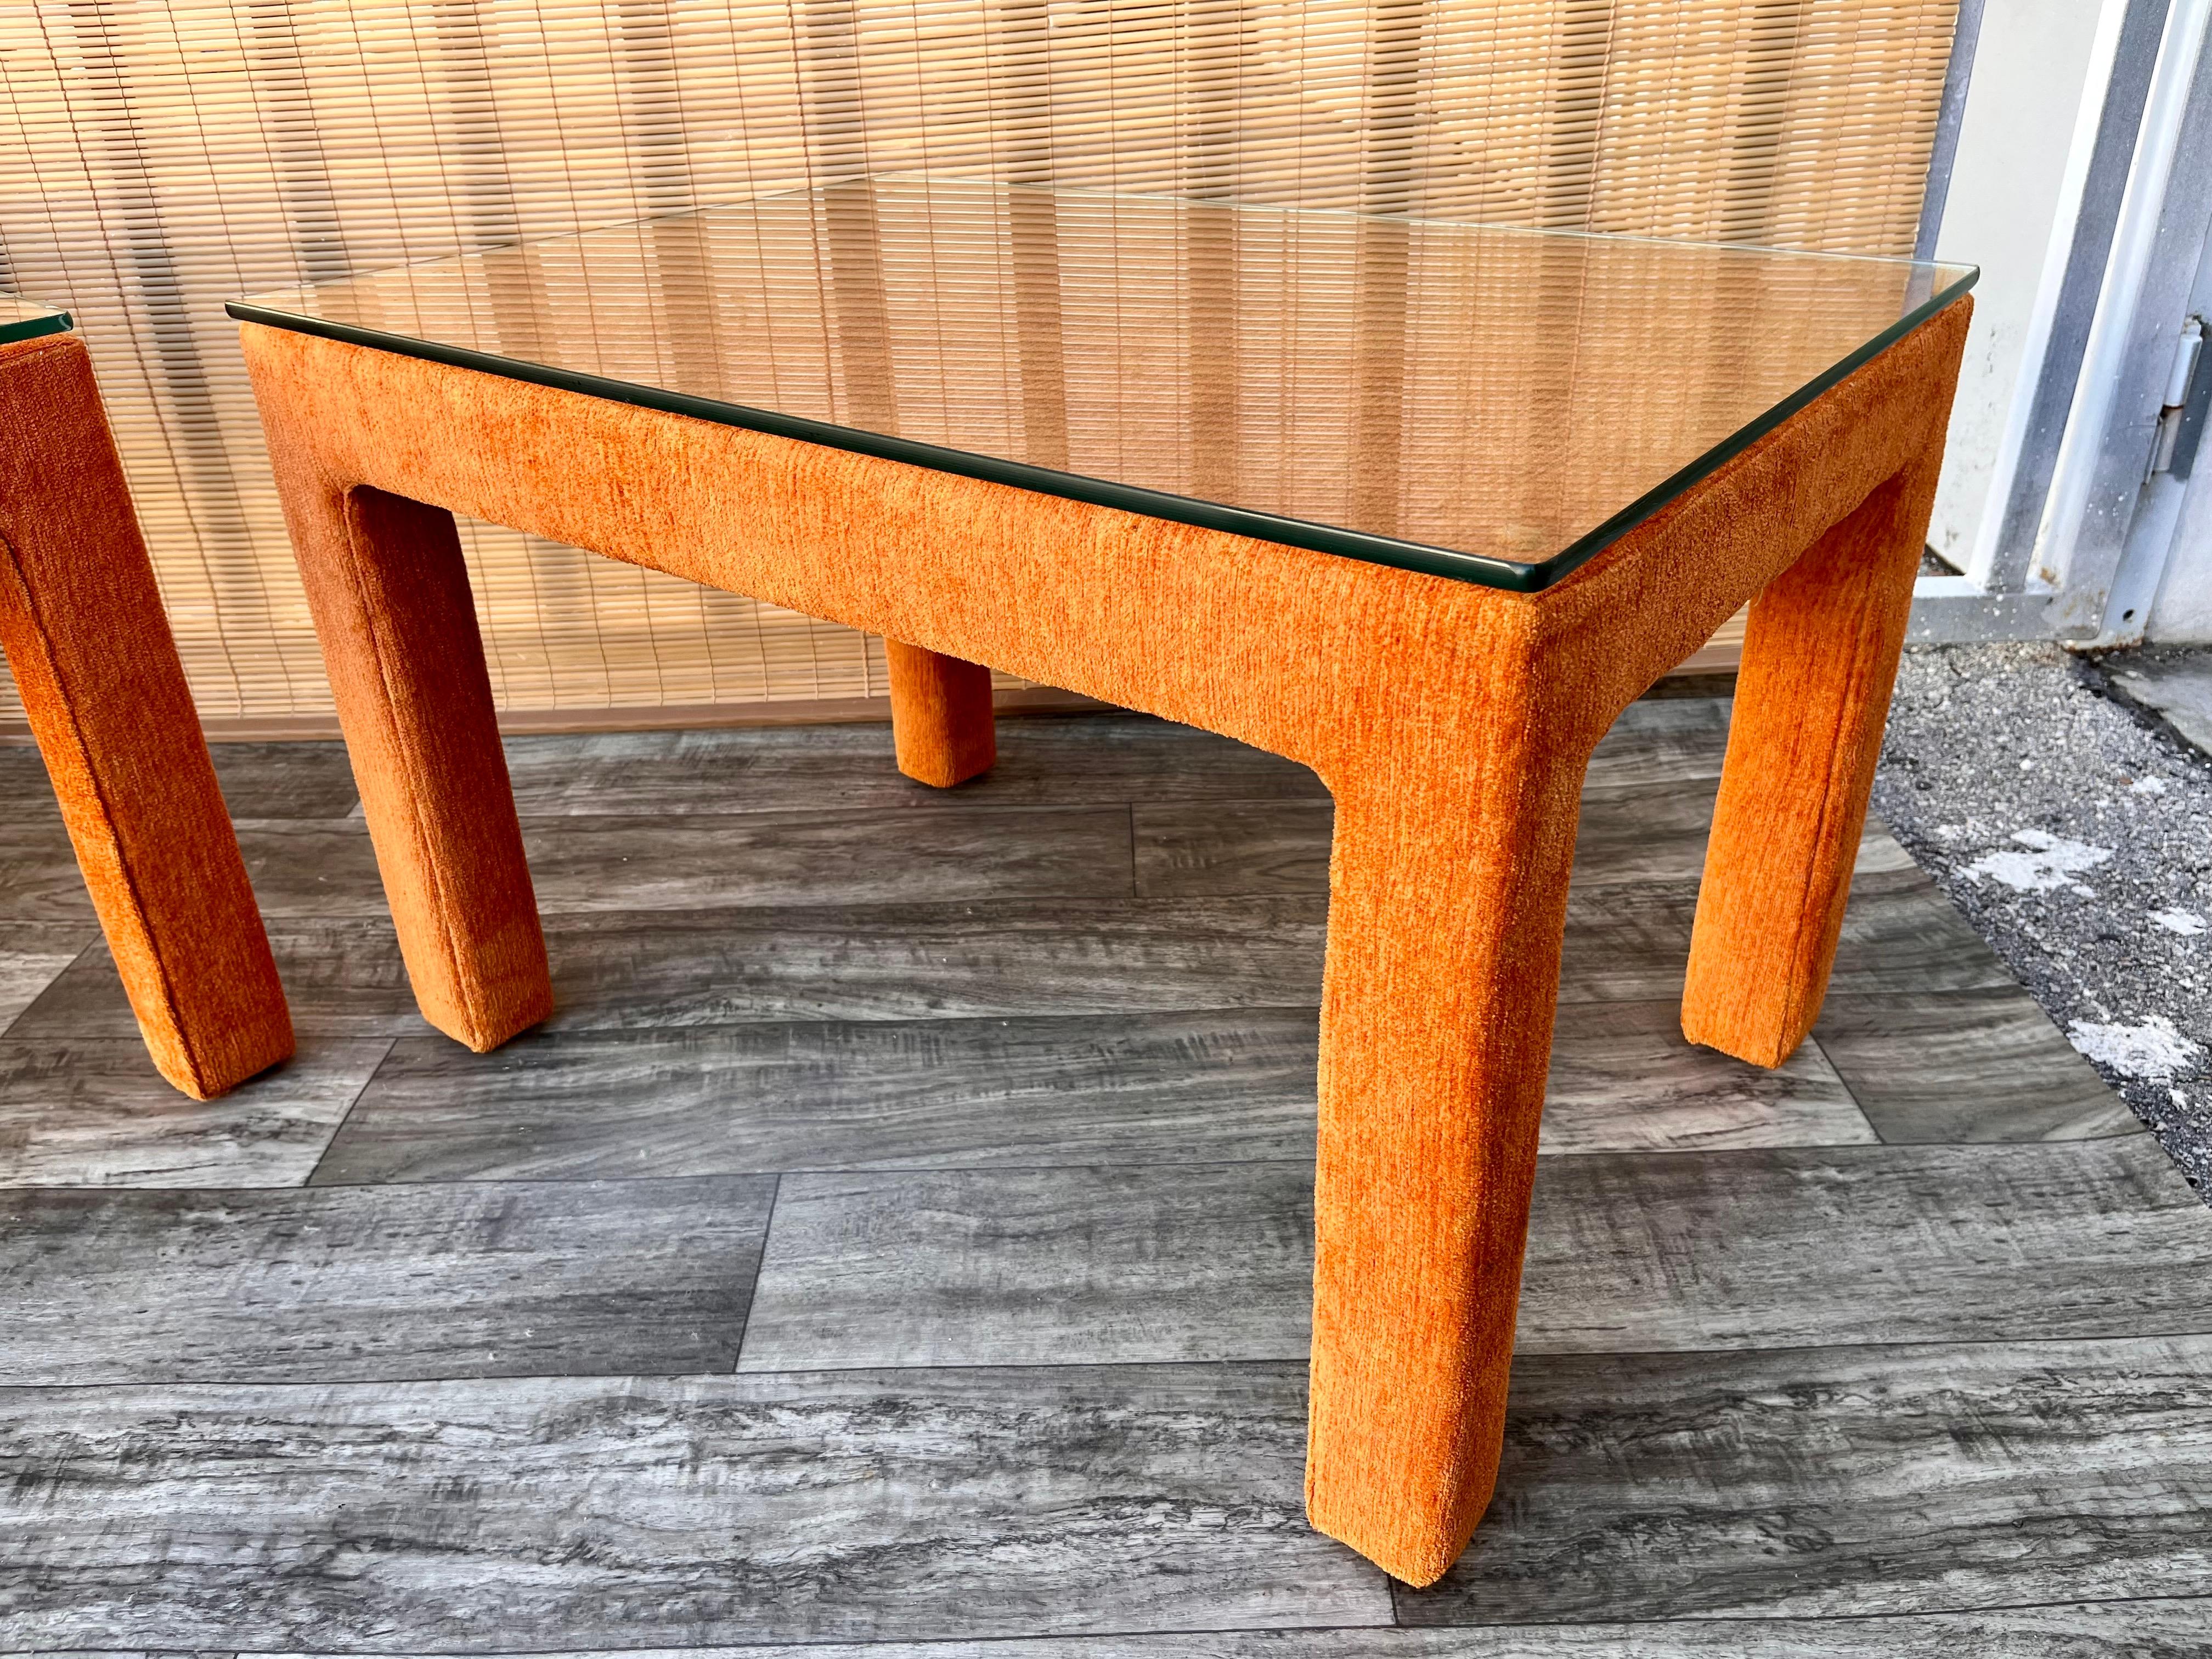 Pair of Mid-Century Modern Fully Upholstered Side Tables, circa 1970s For Sale 7